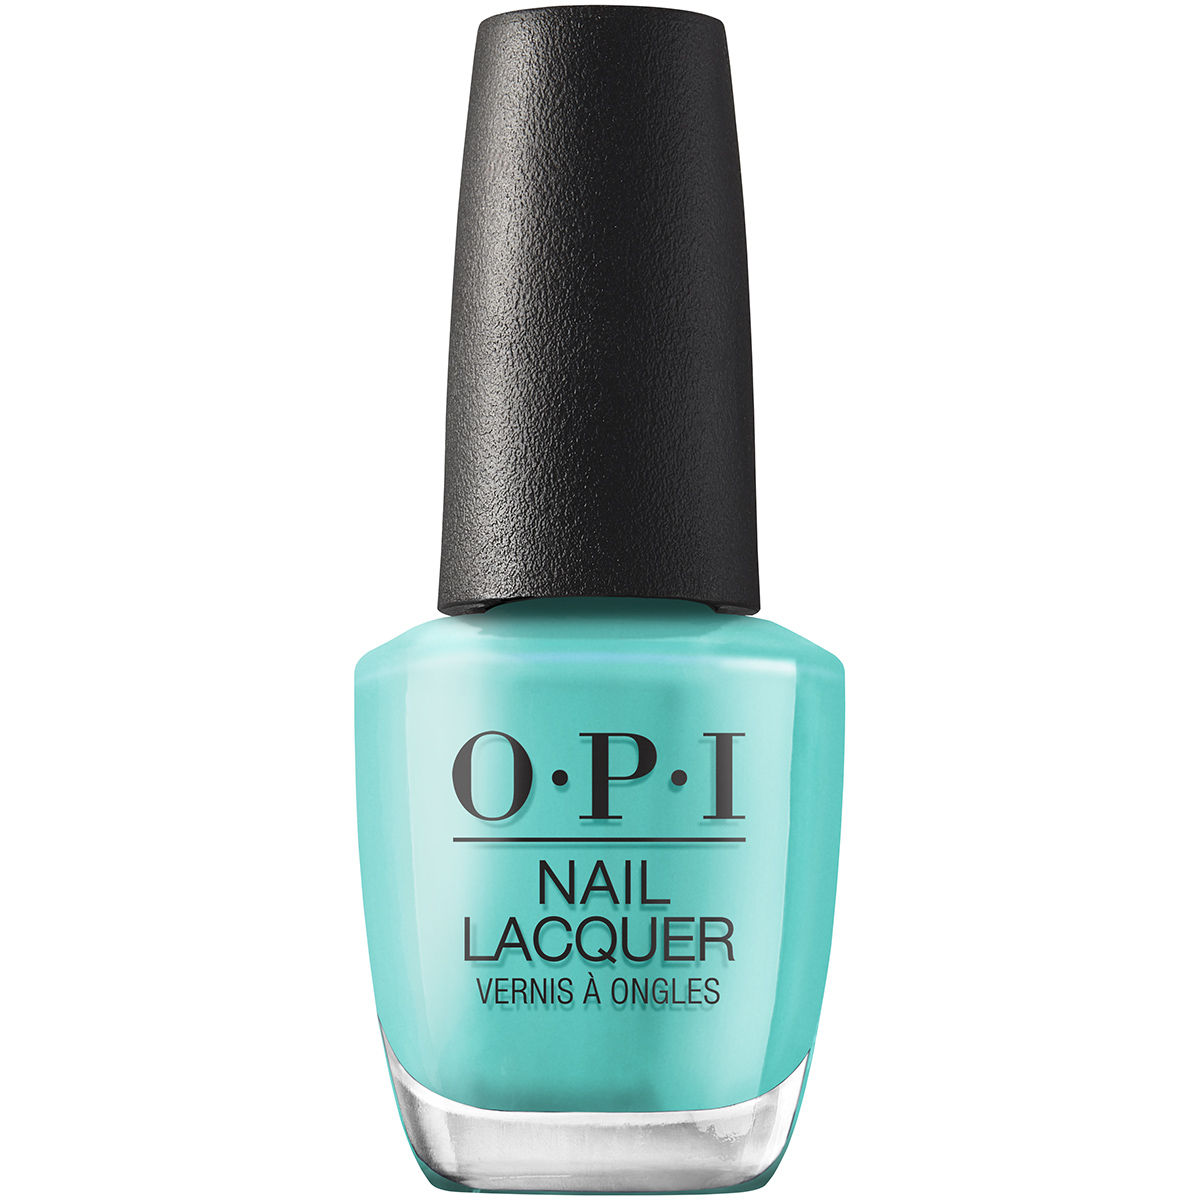 Lac de unghii Nail Lacquer Summer, I m Yacht Leaving, 15 ml, Opi